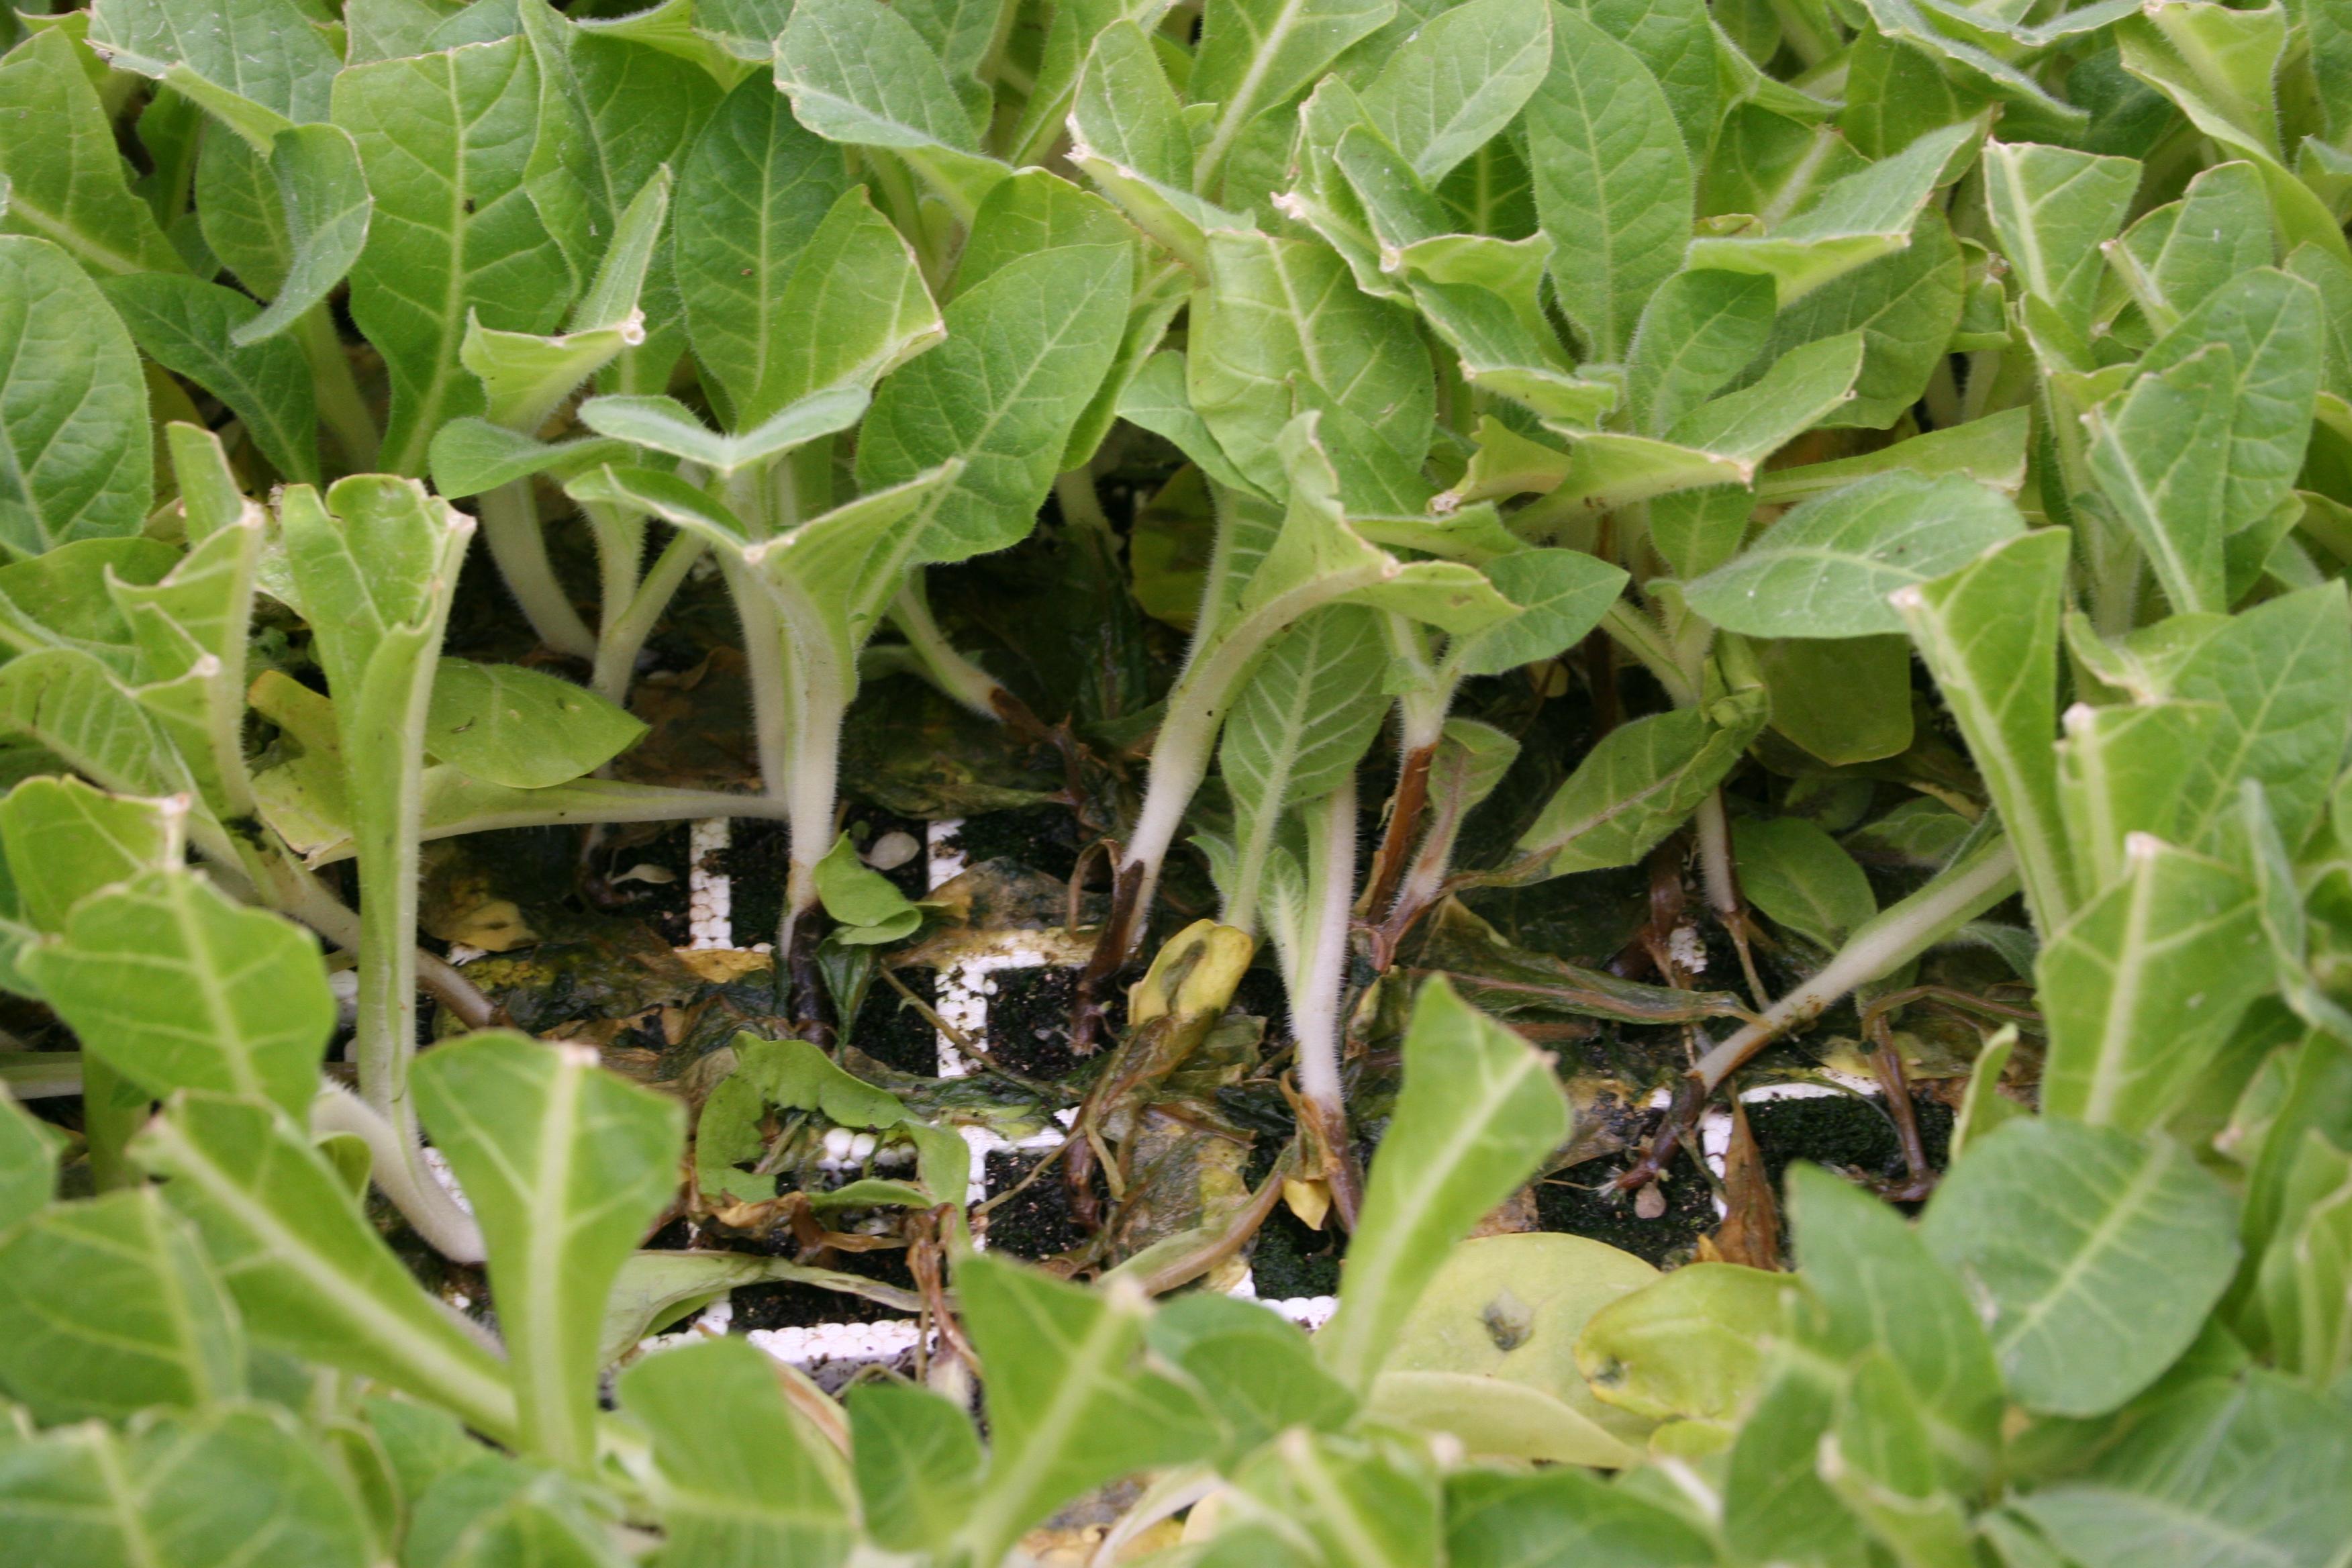 Blackleg bacteria cause a soft rot of lower leaves and leaf material. (Photo: Kenneth Seebold, UK)